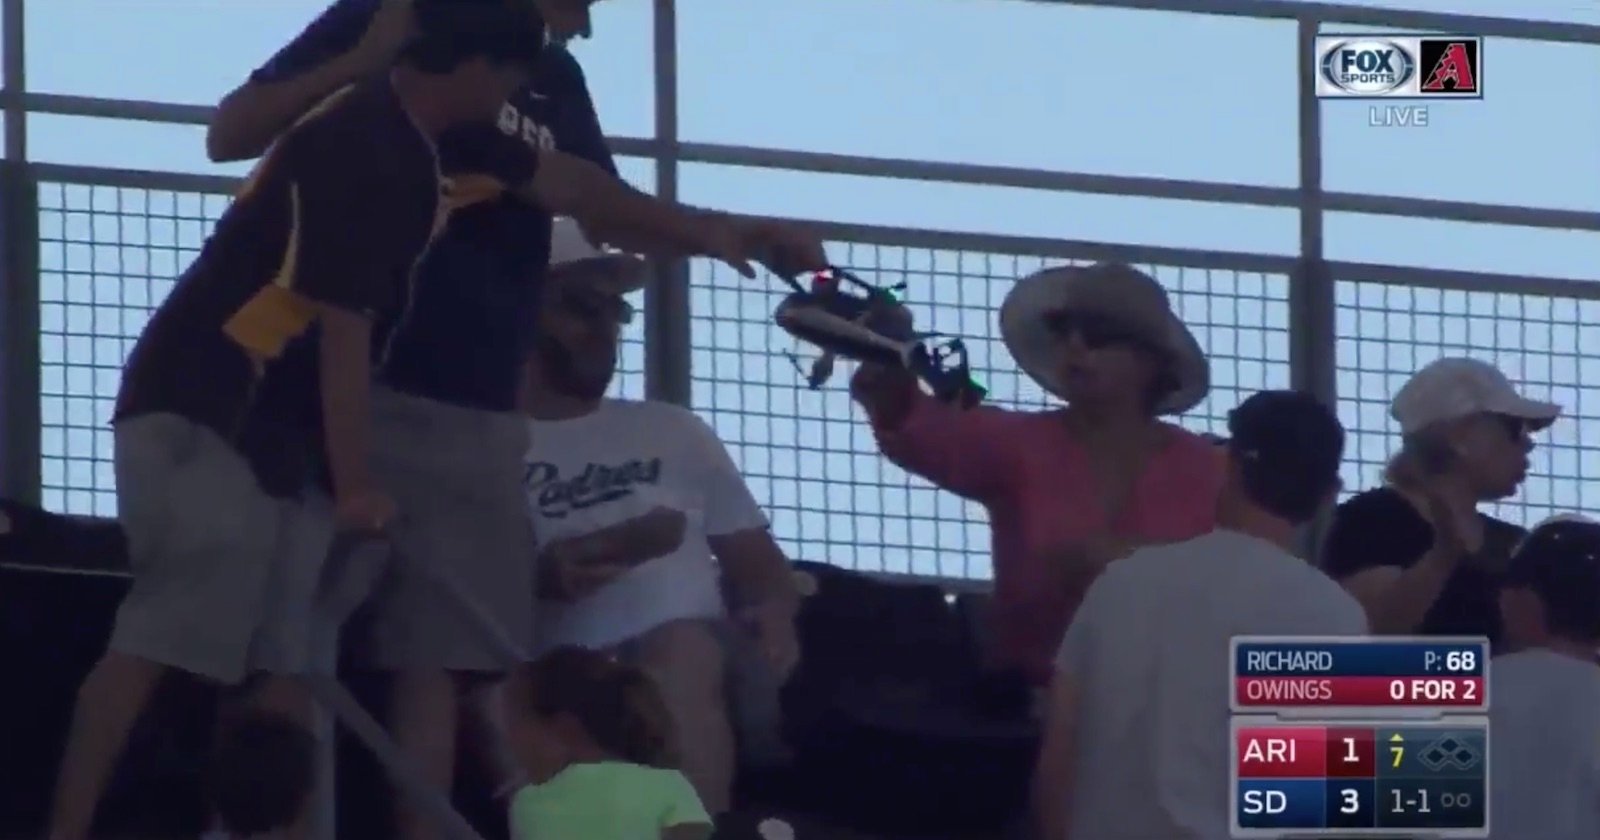  illegal drone slams into stands baseball game 